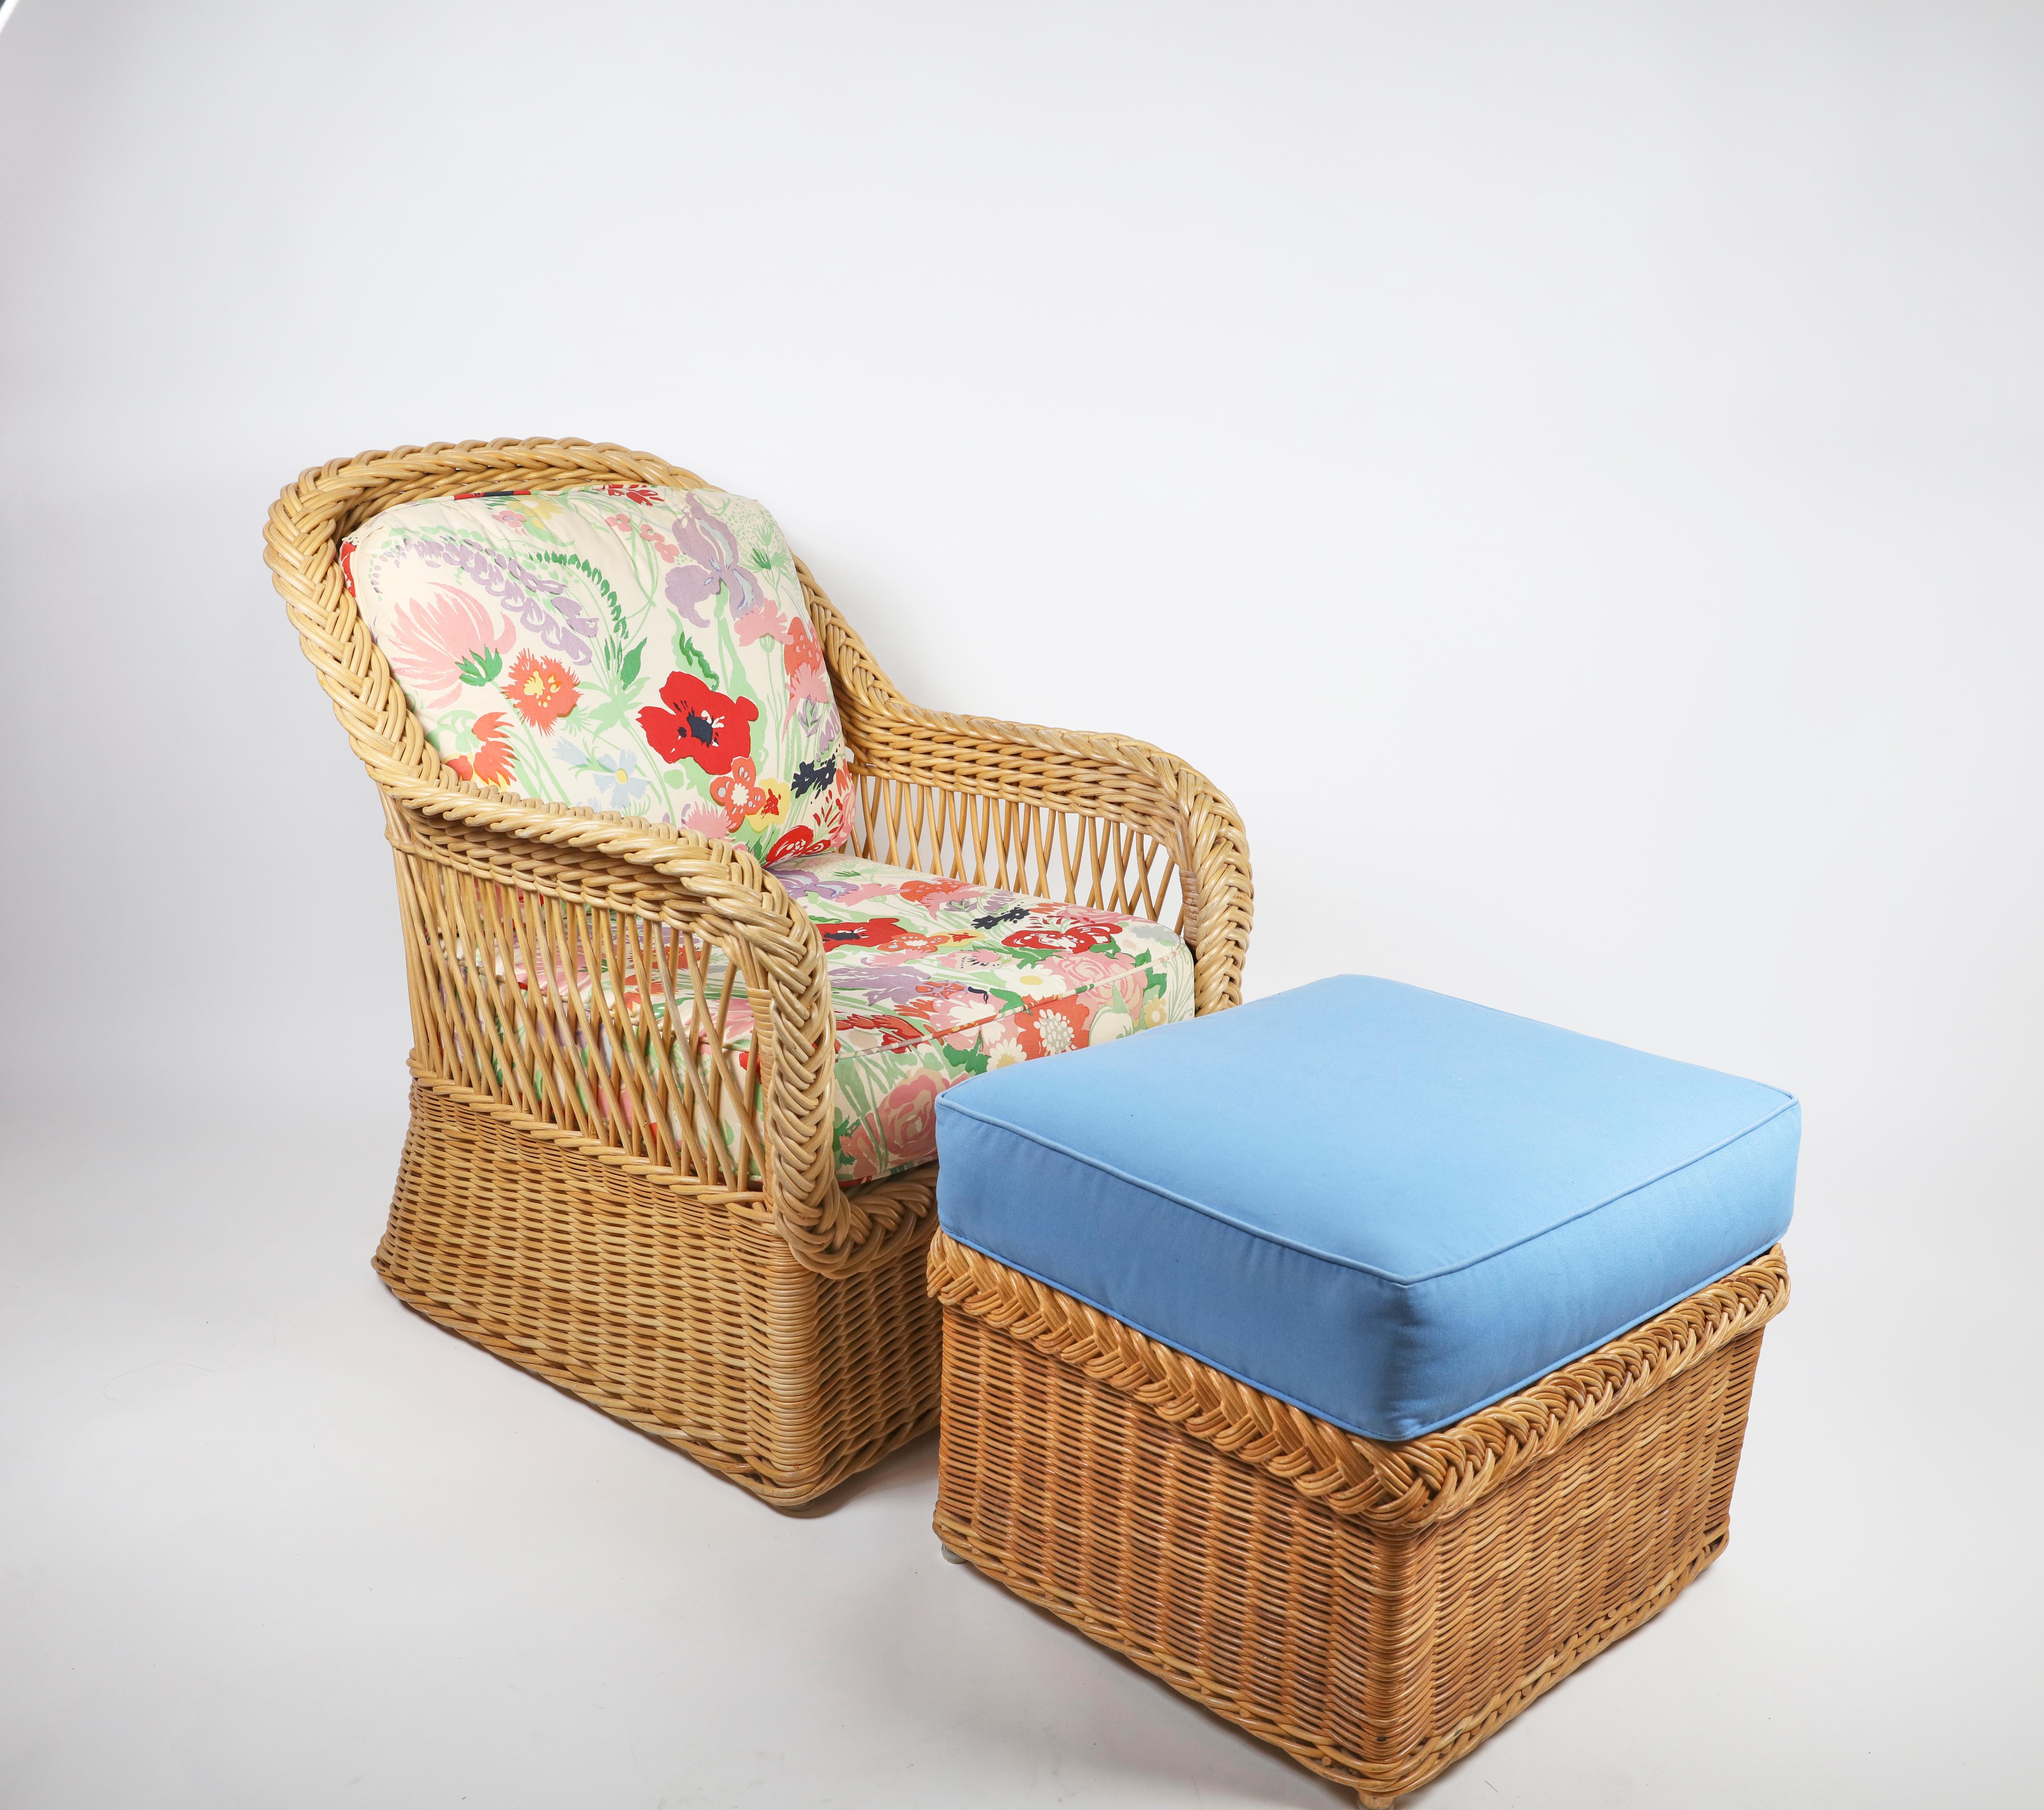 Bielecky Brothers rattan club chair and ottoman floral cushions with blue ottoman.

Measures: Chair 26